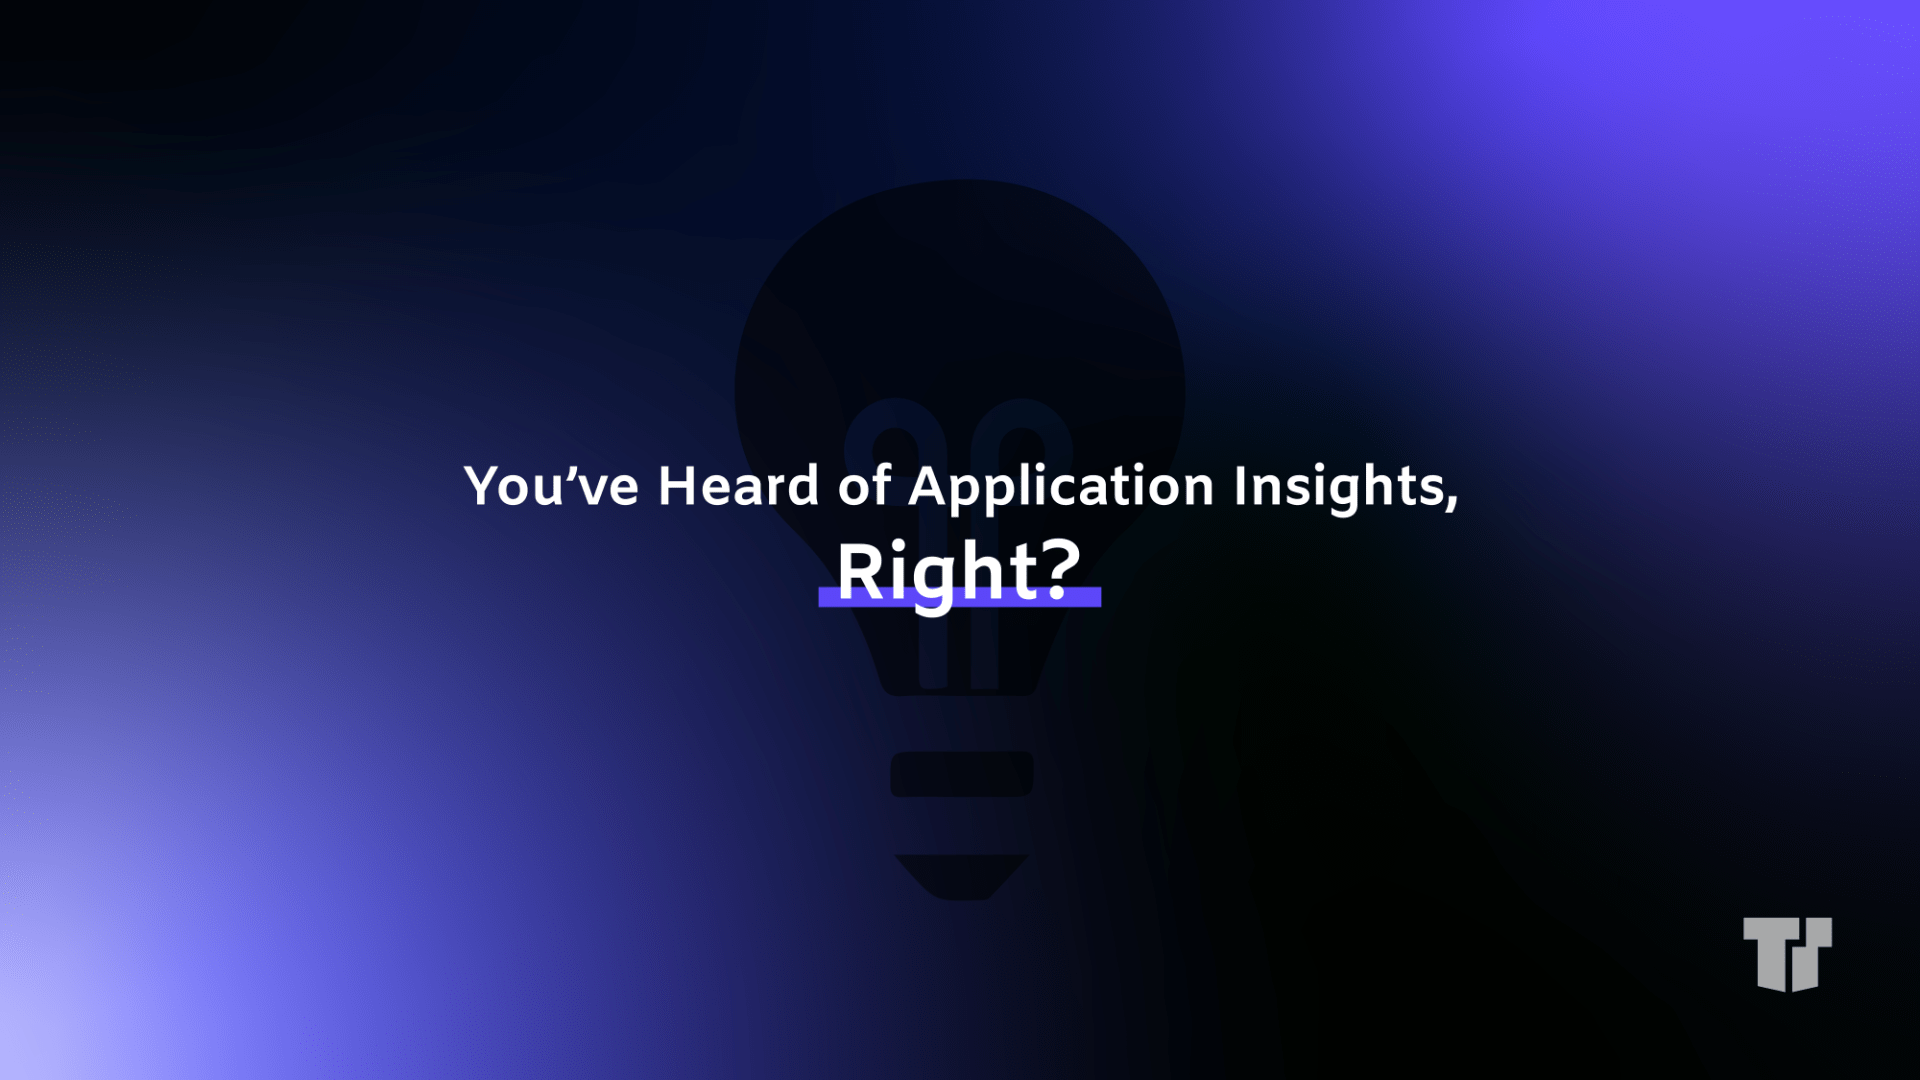 You’ve Heard of Application Insights, Right? cover image